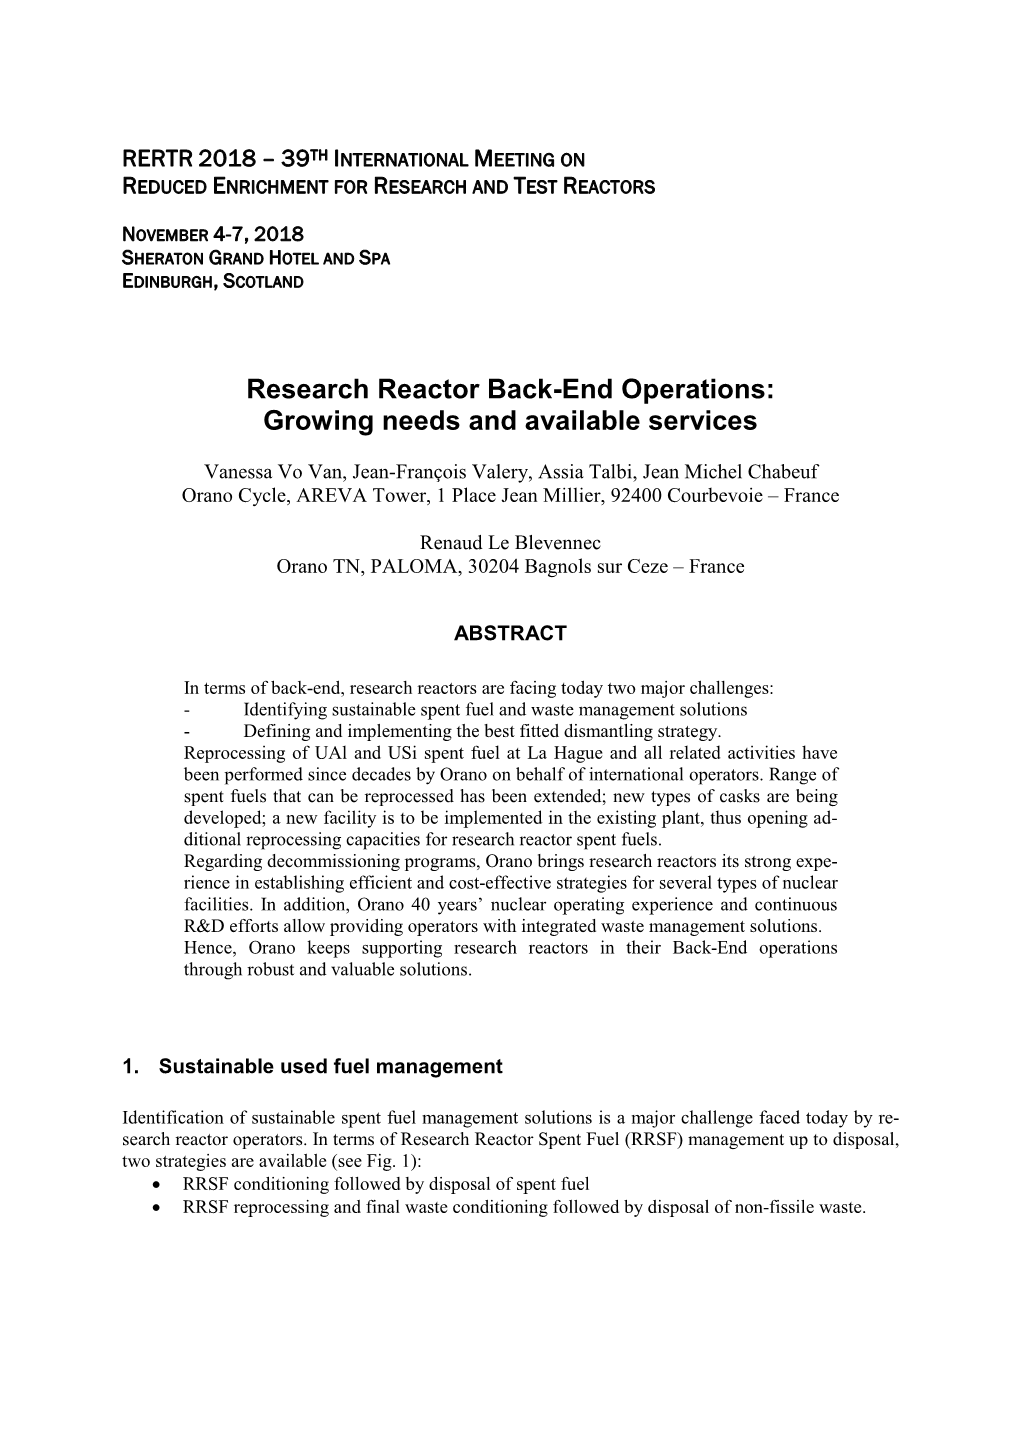 Research Reactor Back-End Operations: Growing Needs and Available Services